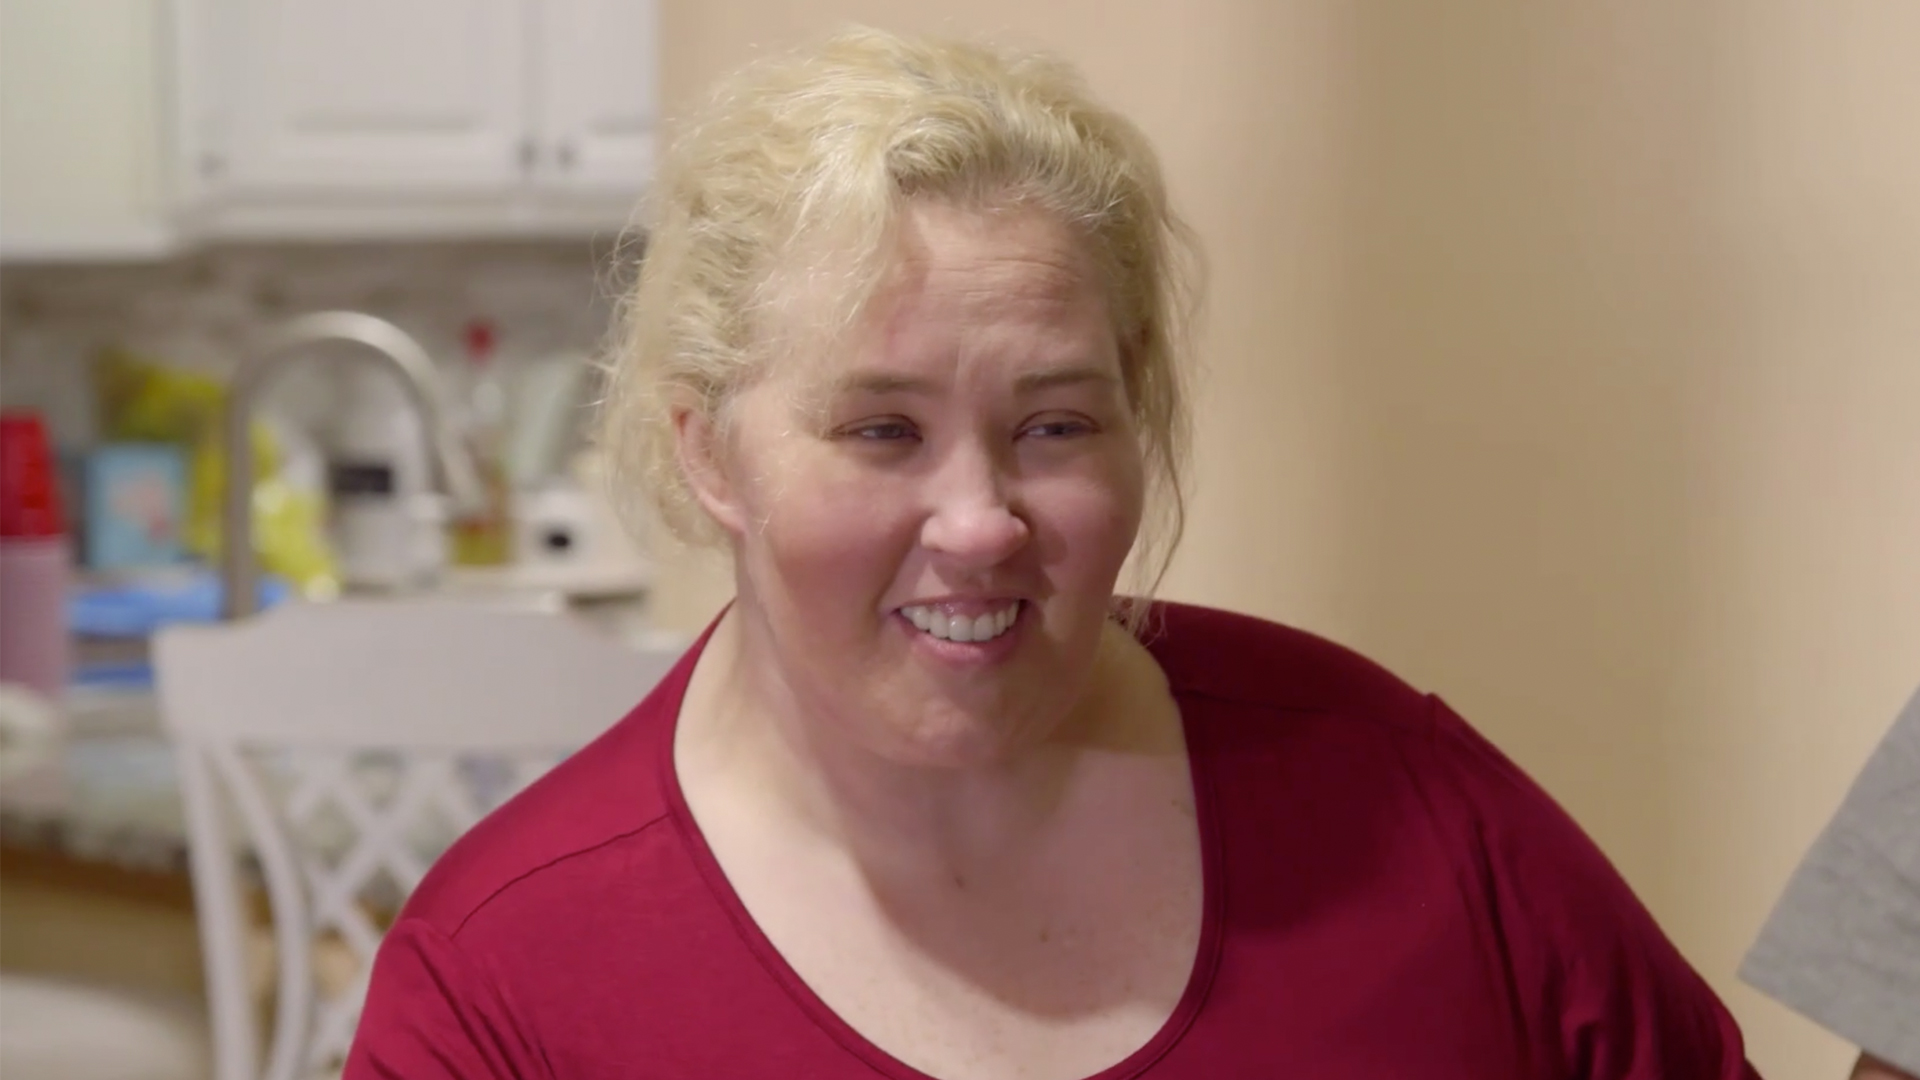 Watch Family Healing Tip #160: It’s All About Compromise! | Mama June: From Not to Hot Video Extras